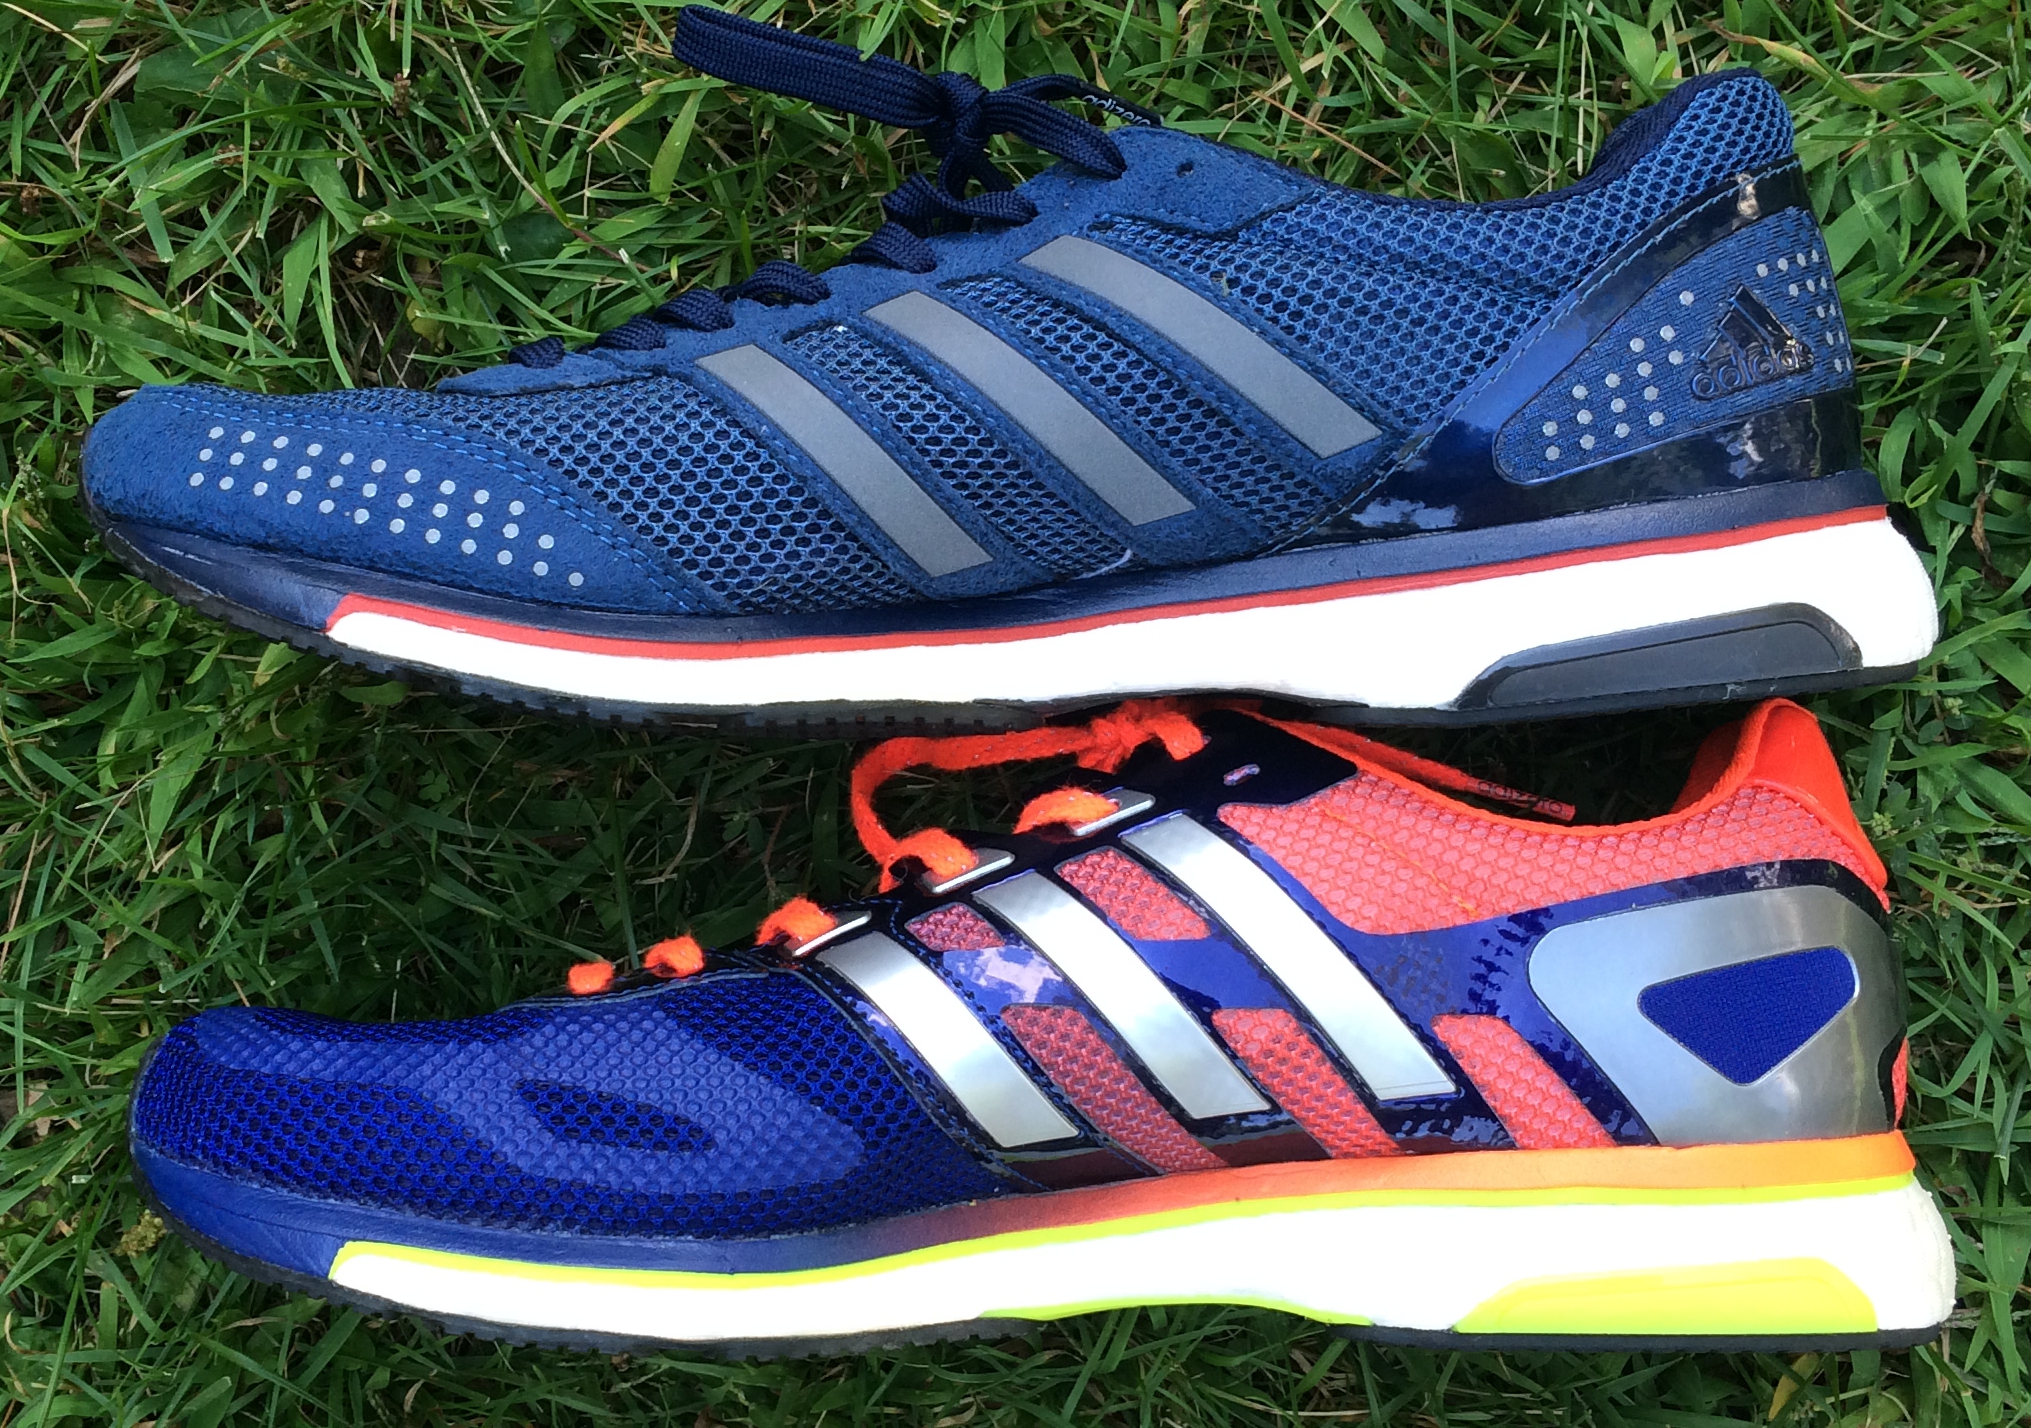 Of anders Einde donker adidas Adios Boost 2 Review: Same Great Ride, Different Fit